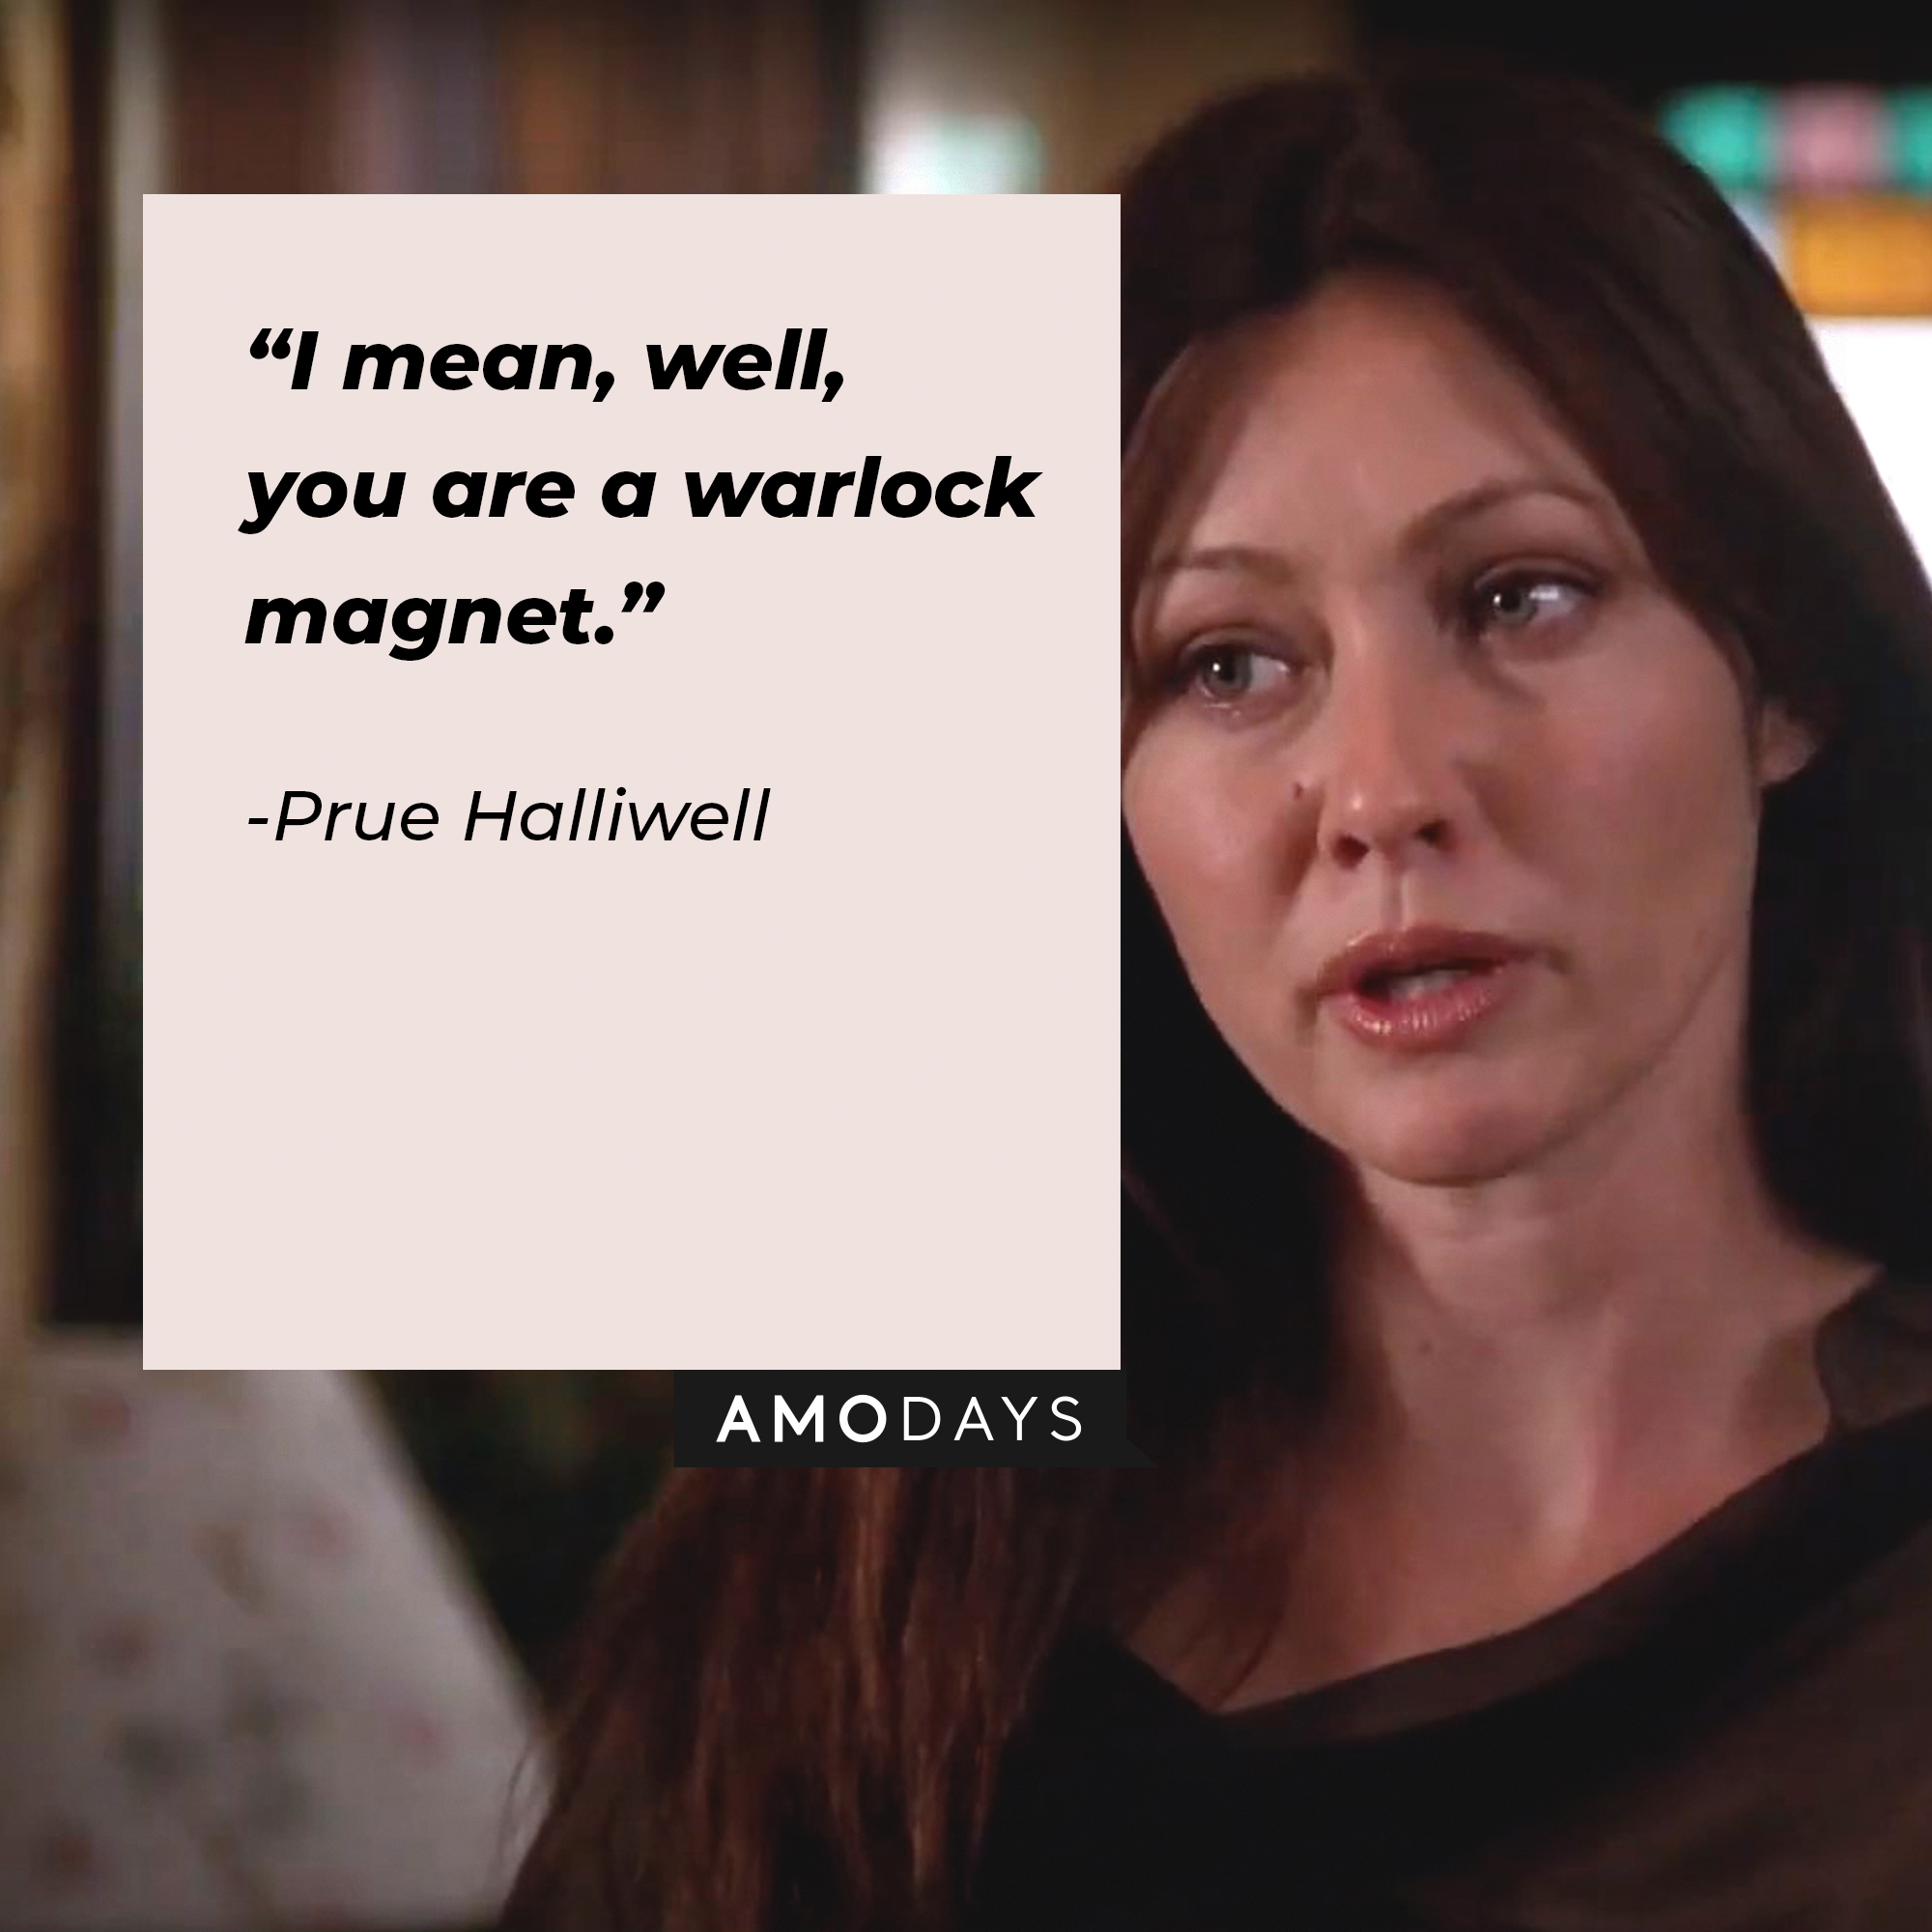 An image of Prue Halliwell with her quote: “I mean, well, you are a warlock magnet.” │Source: facebook.com/charmedtv